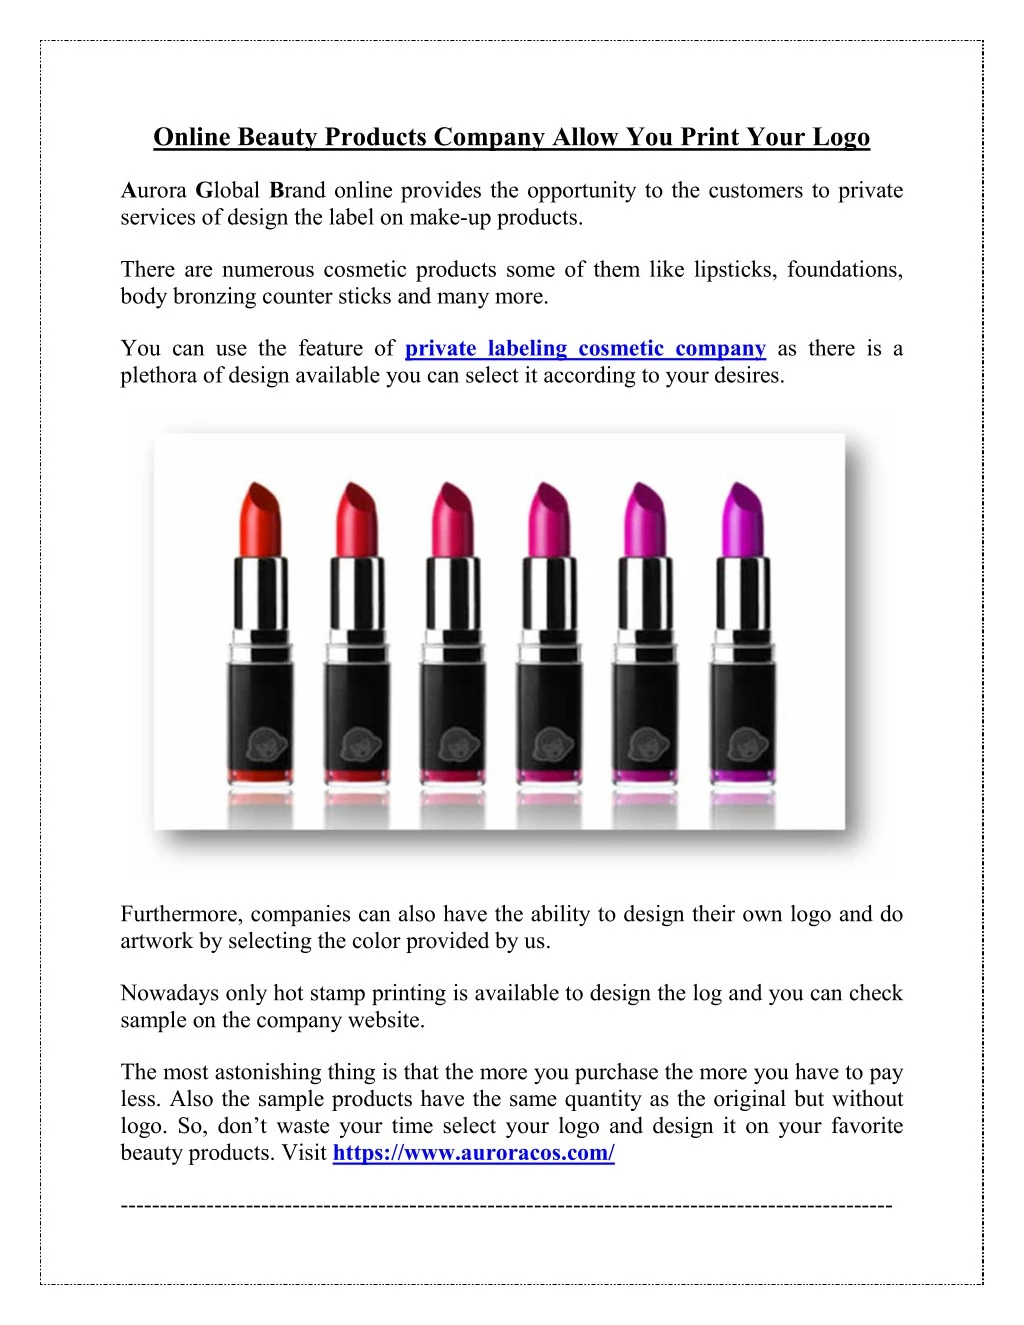 online beauty products company allow you print